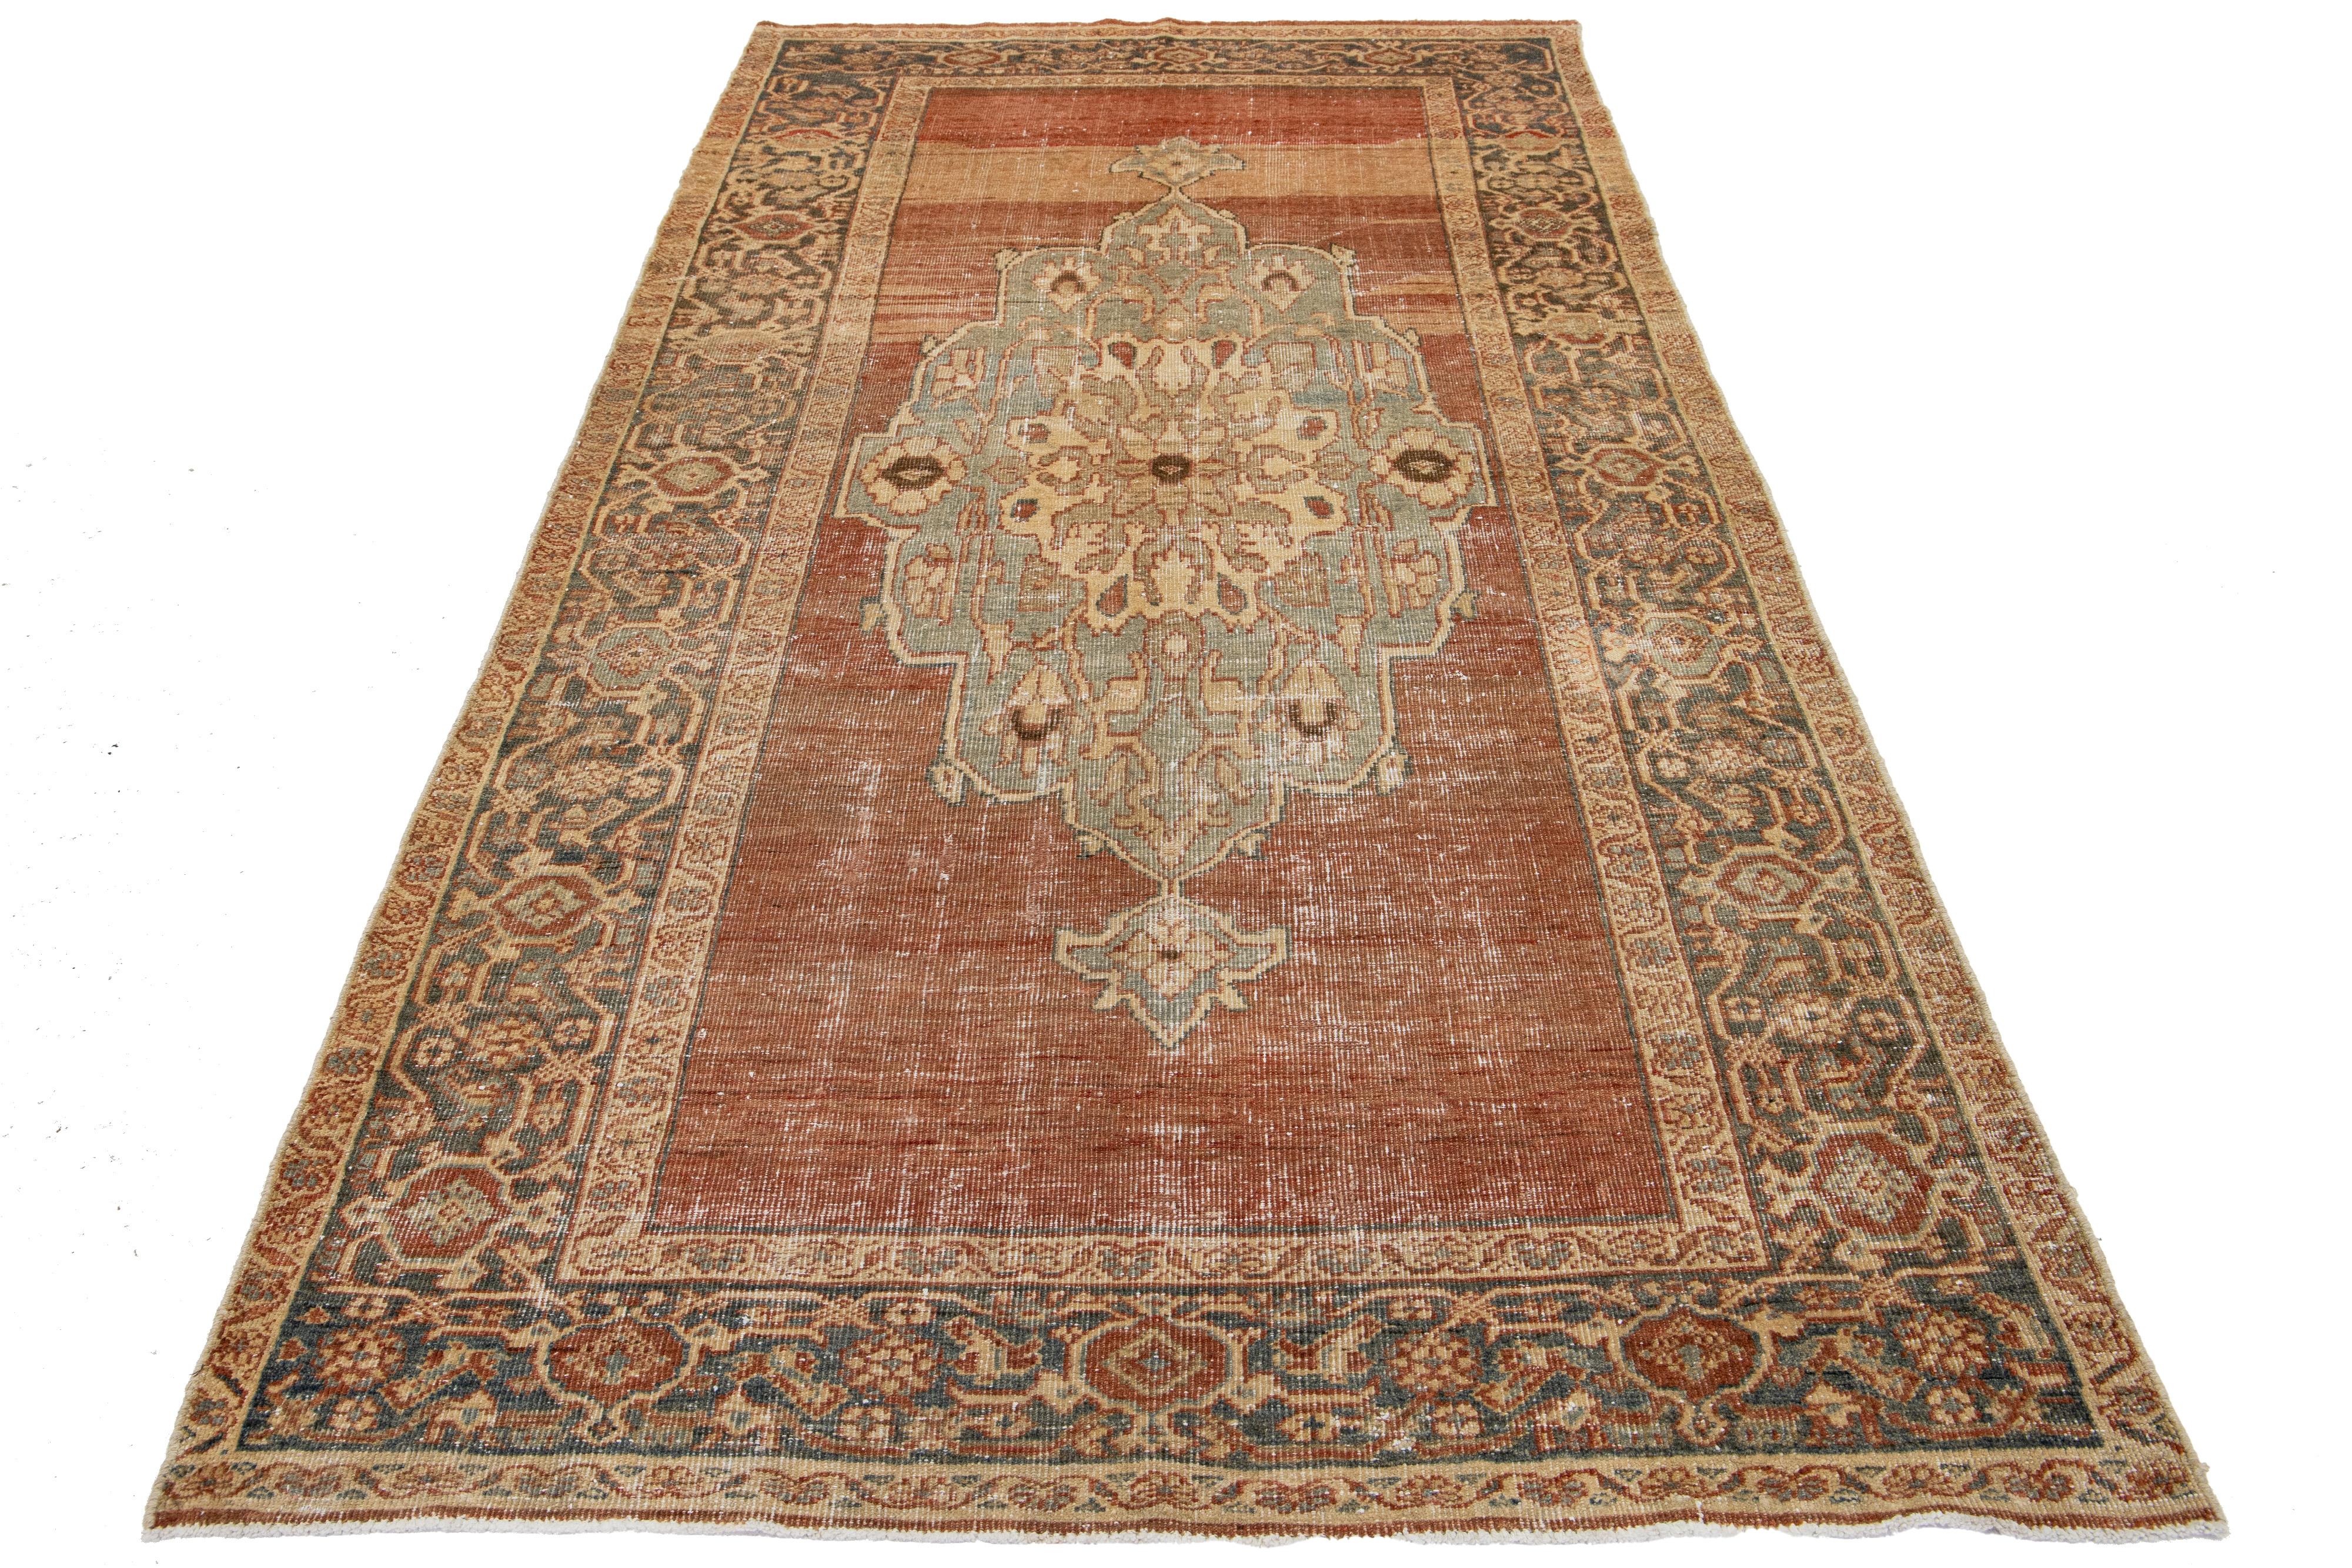 Hand-knotted wool Persian rug featuring a rust-colored field with a blue, gray, and beige medallion motif.

This rug measures 5'1